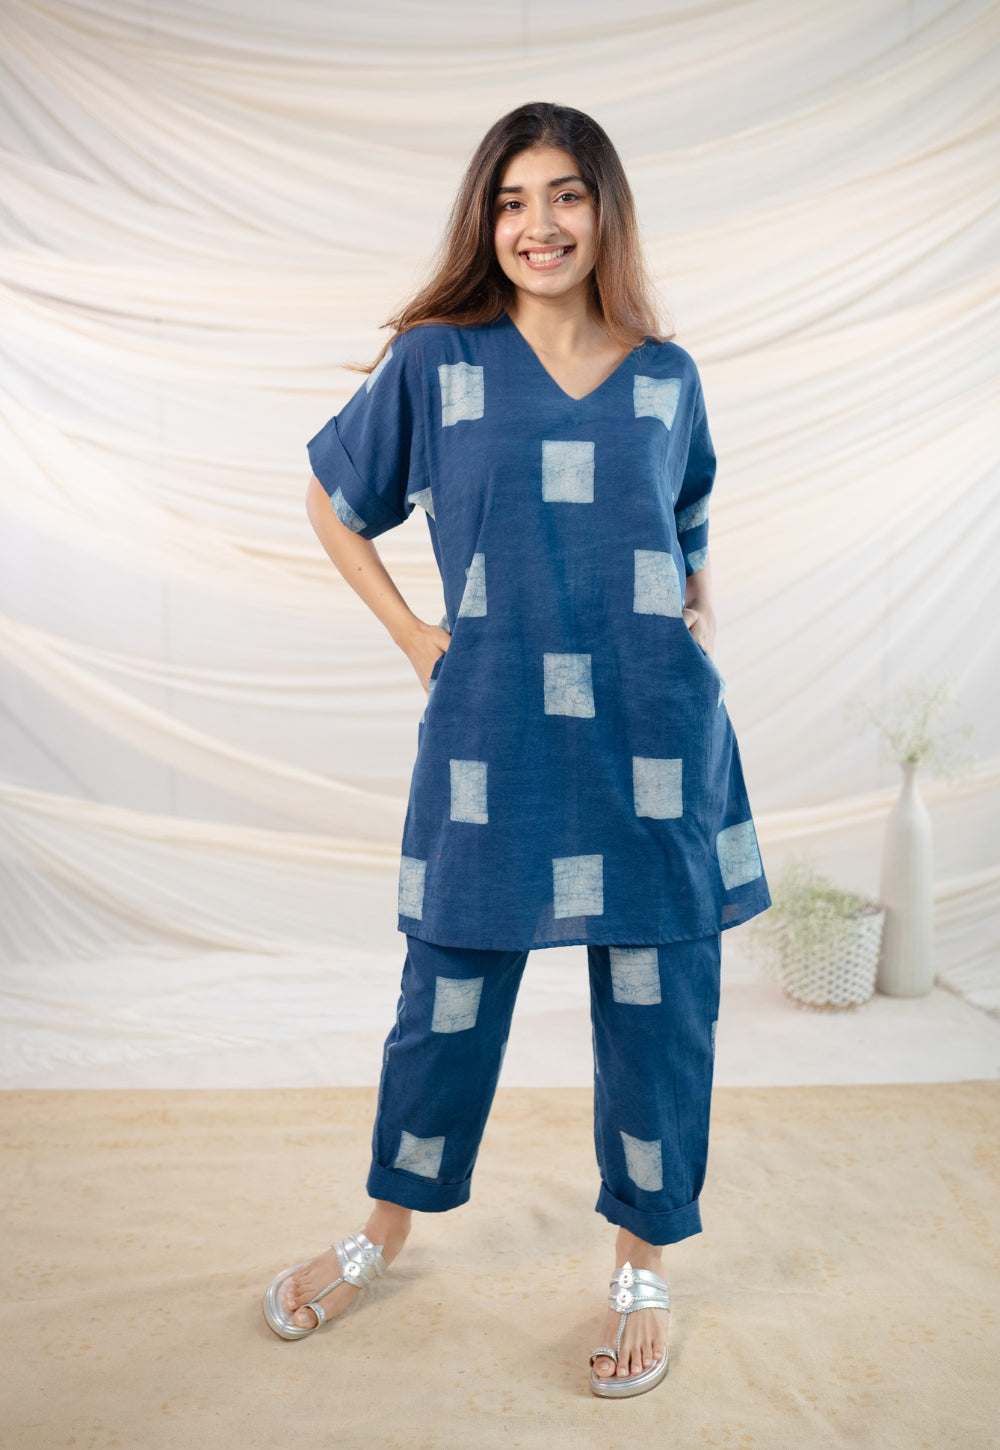 5xl Womens Shirts - Buy 5xl Womens Shirts Online at Best Prices In India